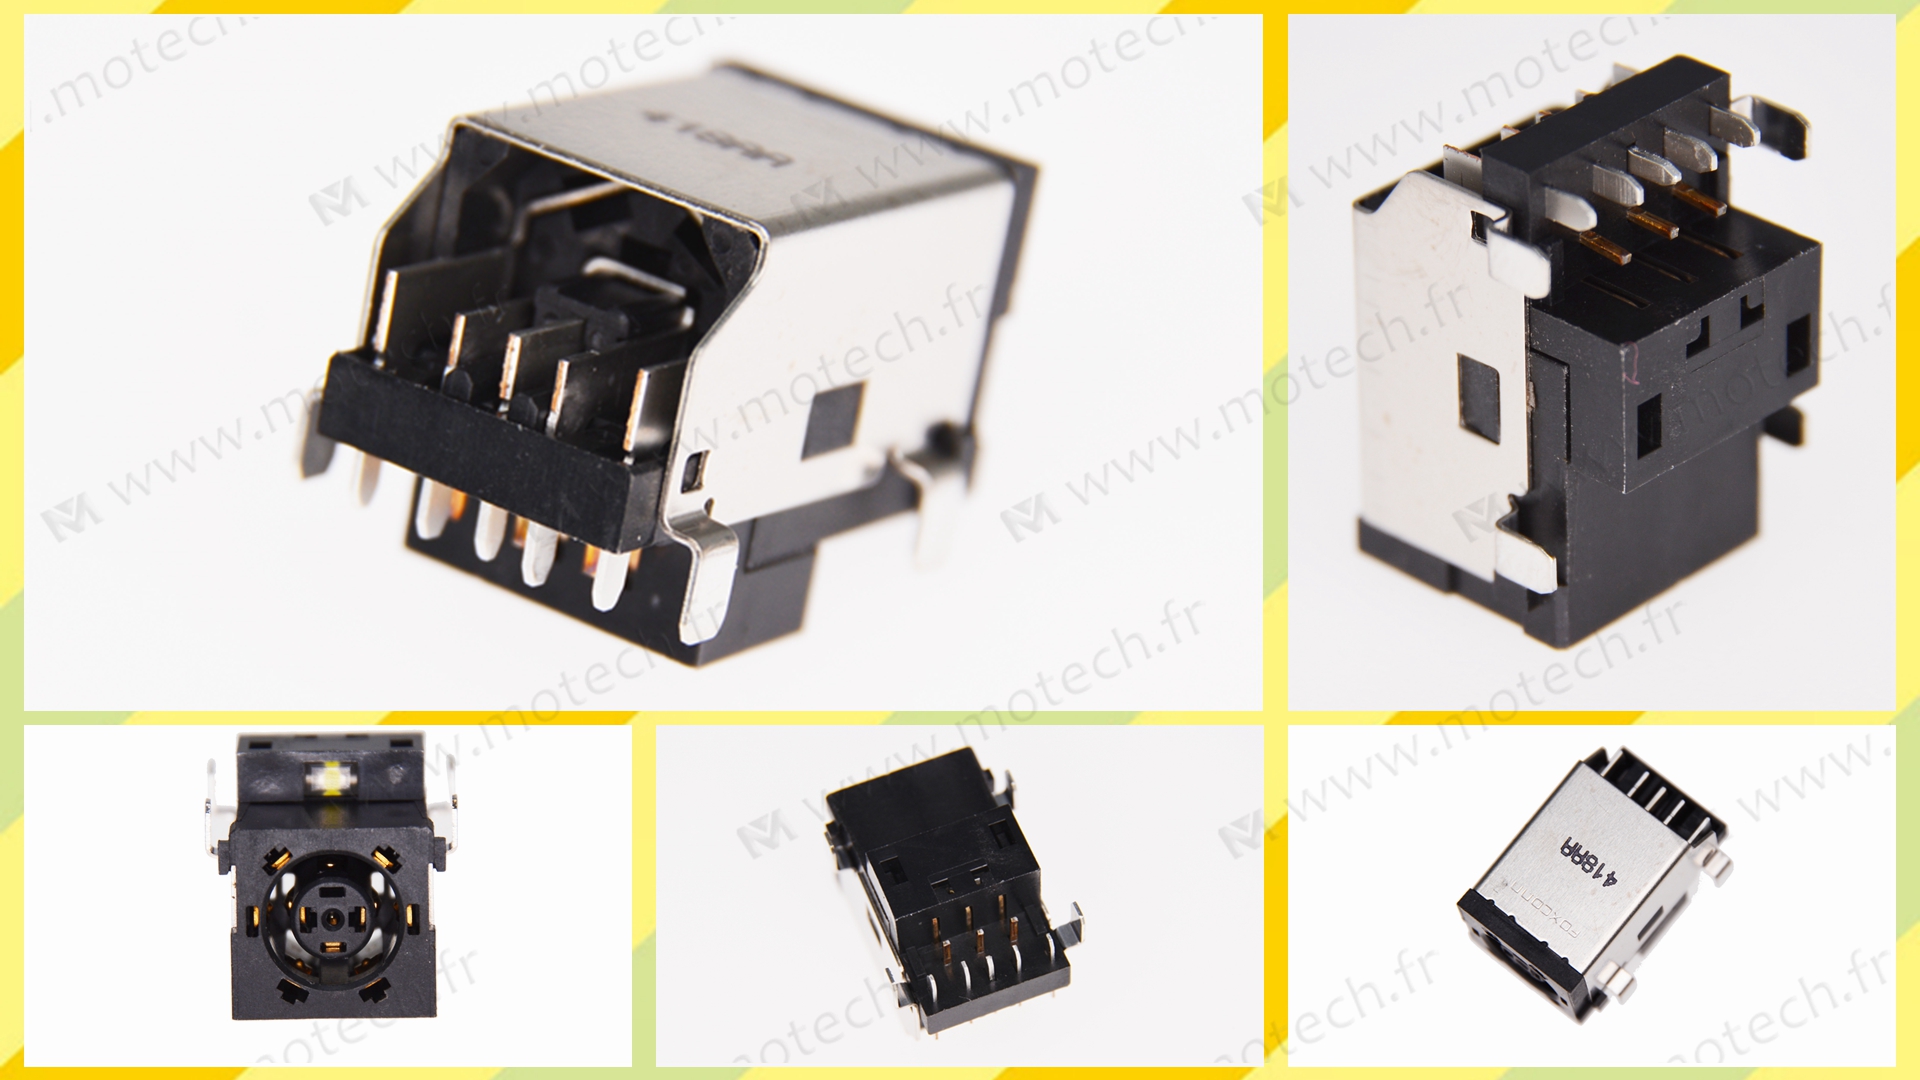 Dell 1737 charging connector, Dell 1737 DC Power Jack, Dell 1737 Power Jack, Dell 1737 plug, Dell 1737 Jack socket, Dell 1737 connecteur de charge, 